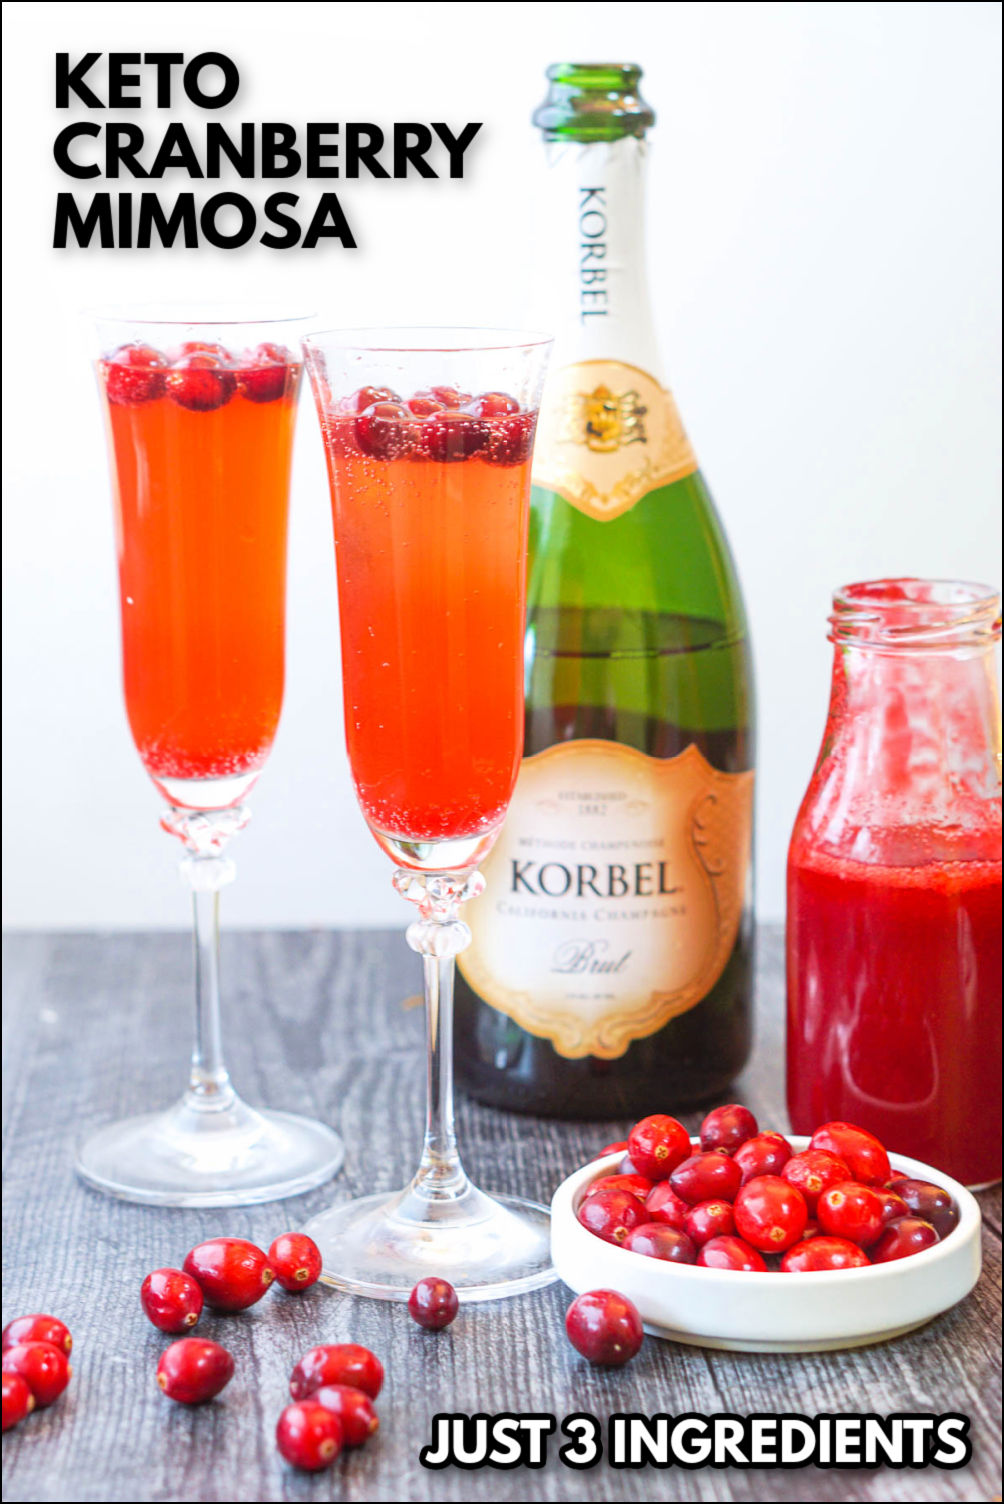 2 champagne flutes with the keto cranberry mimosas and text